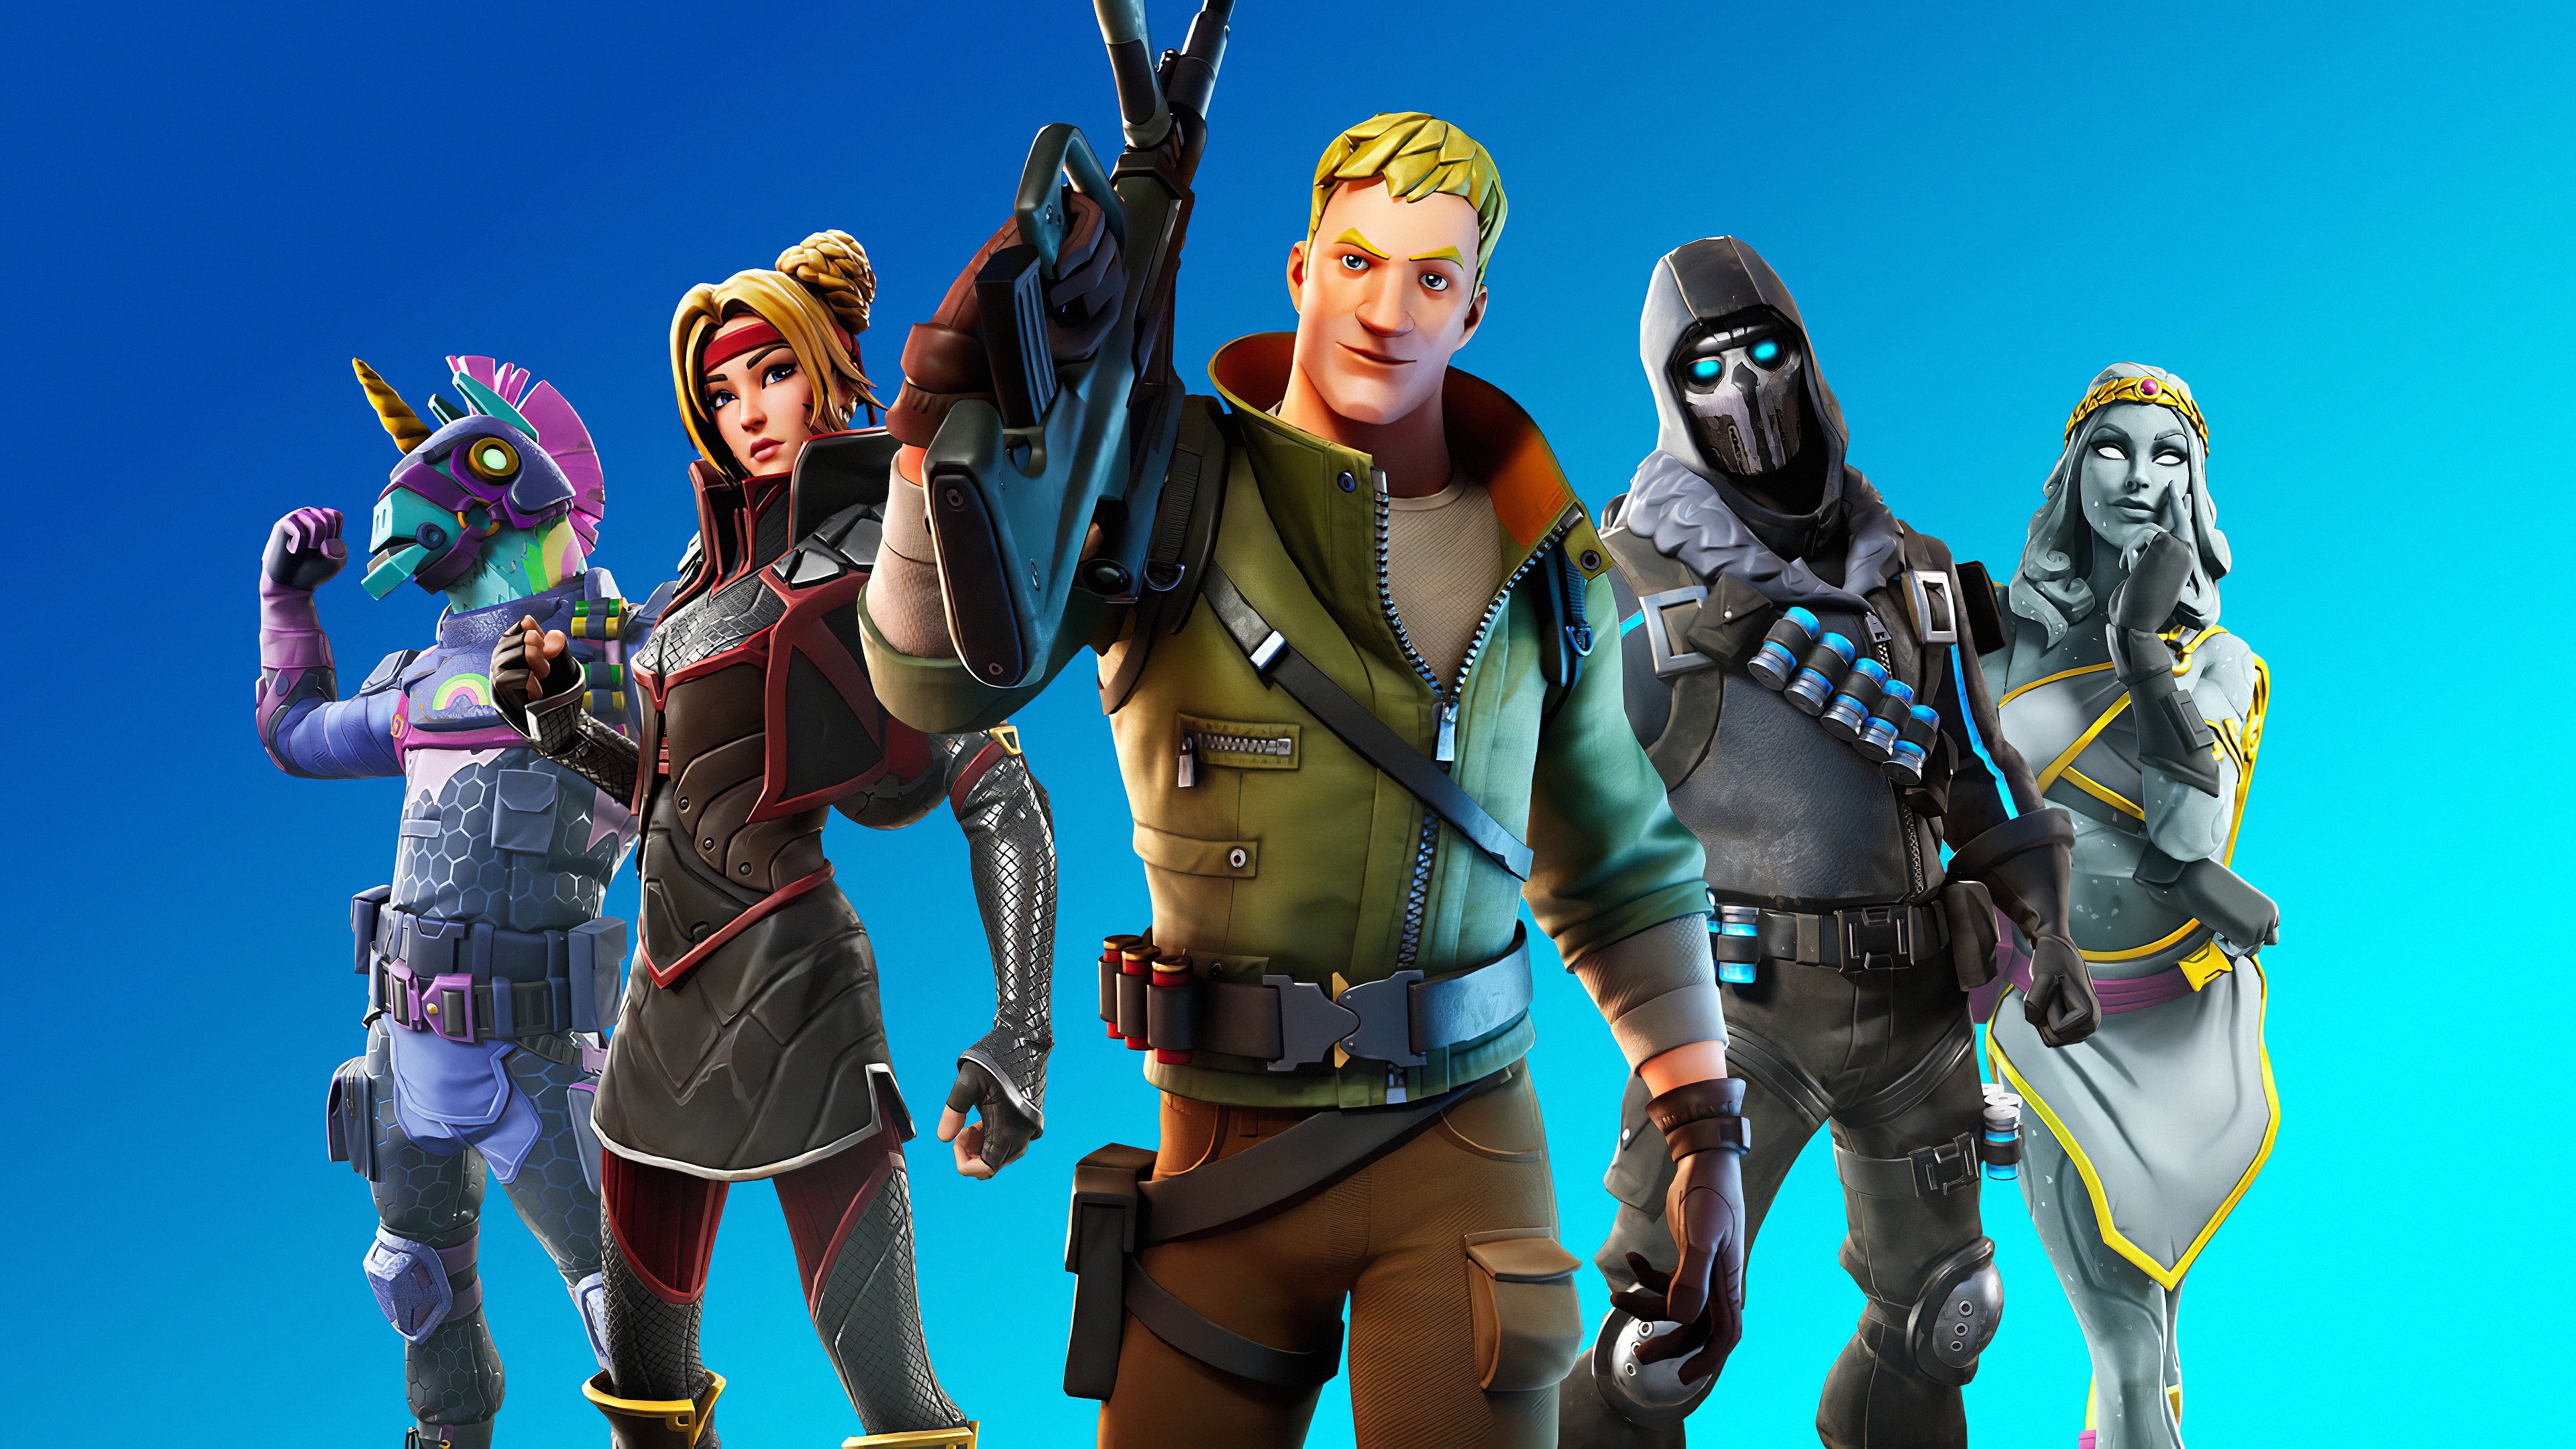 Fortnite Group Wallpaper, HD Games 4K Wallpapers, Images and Background